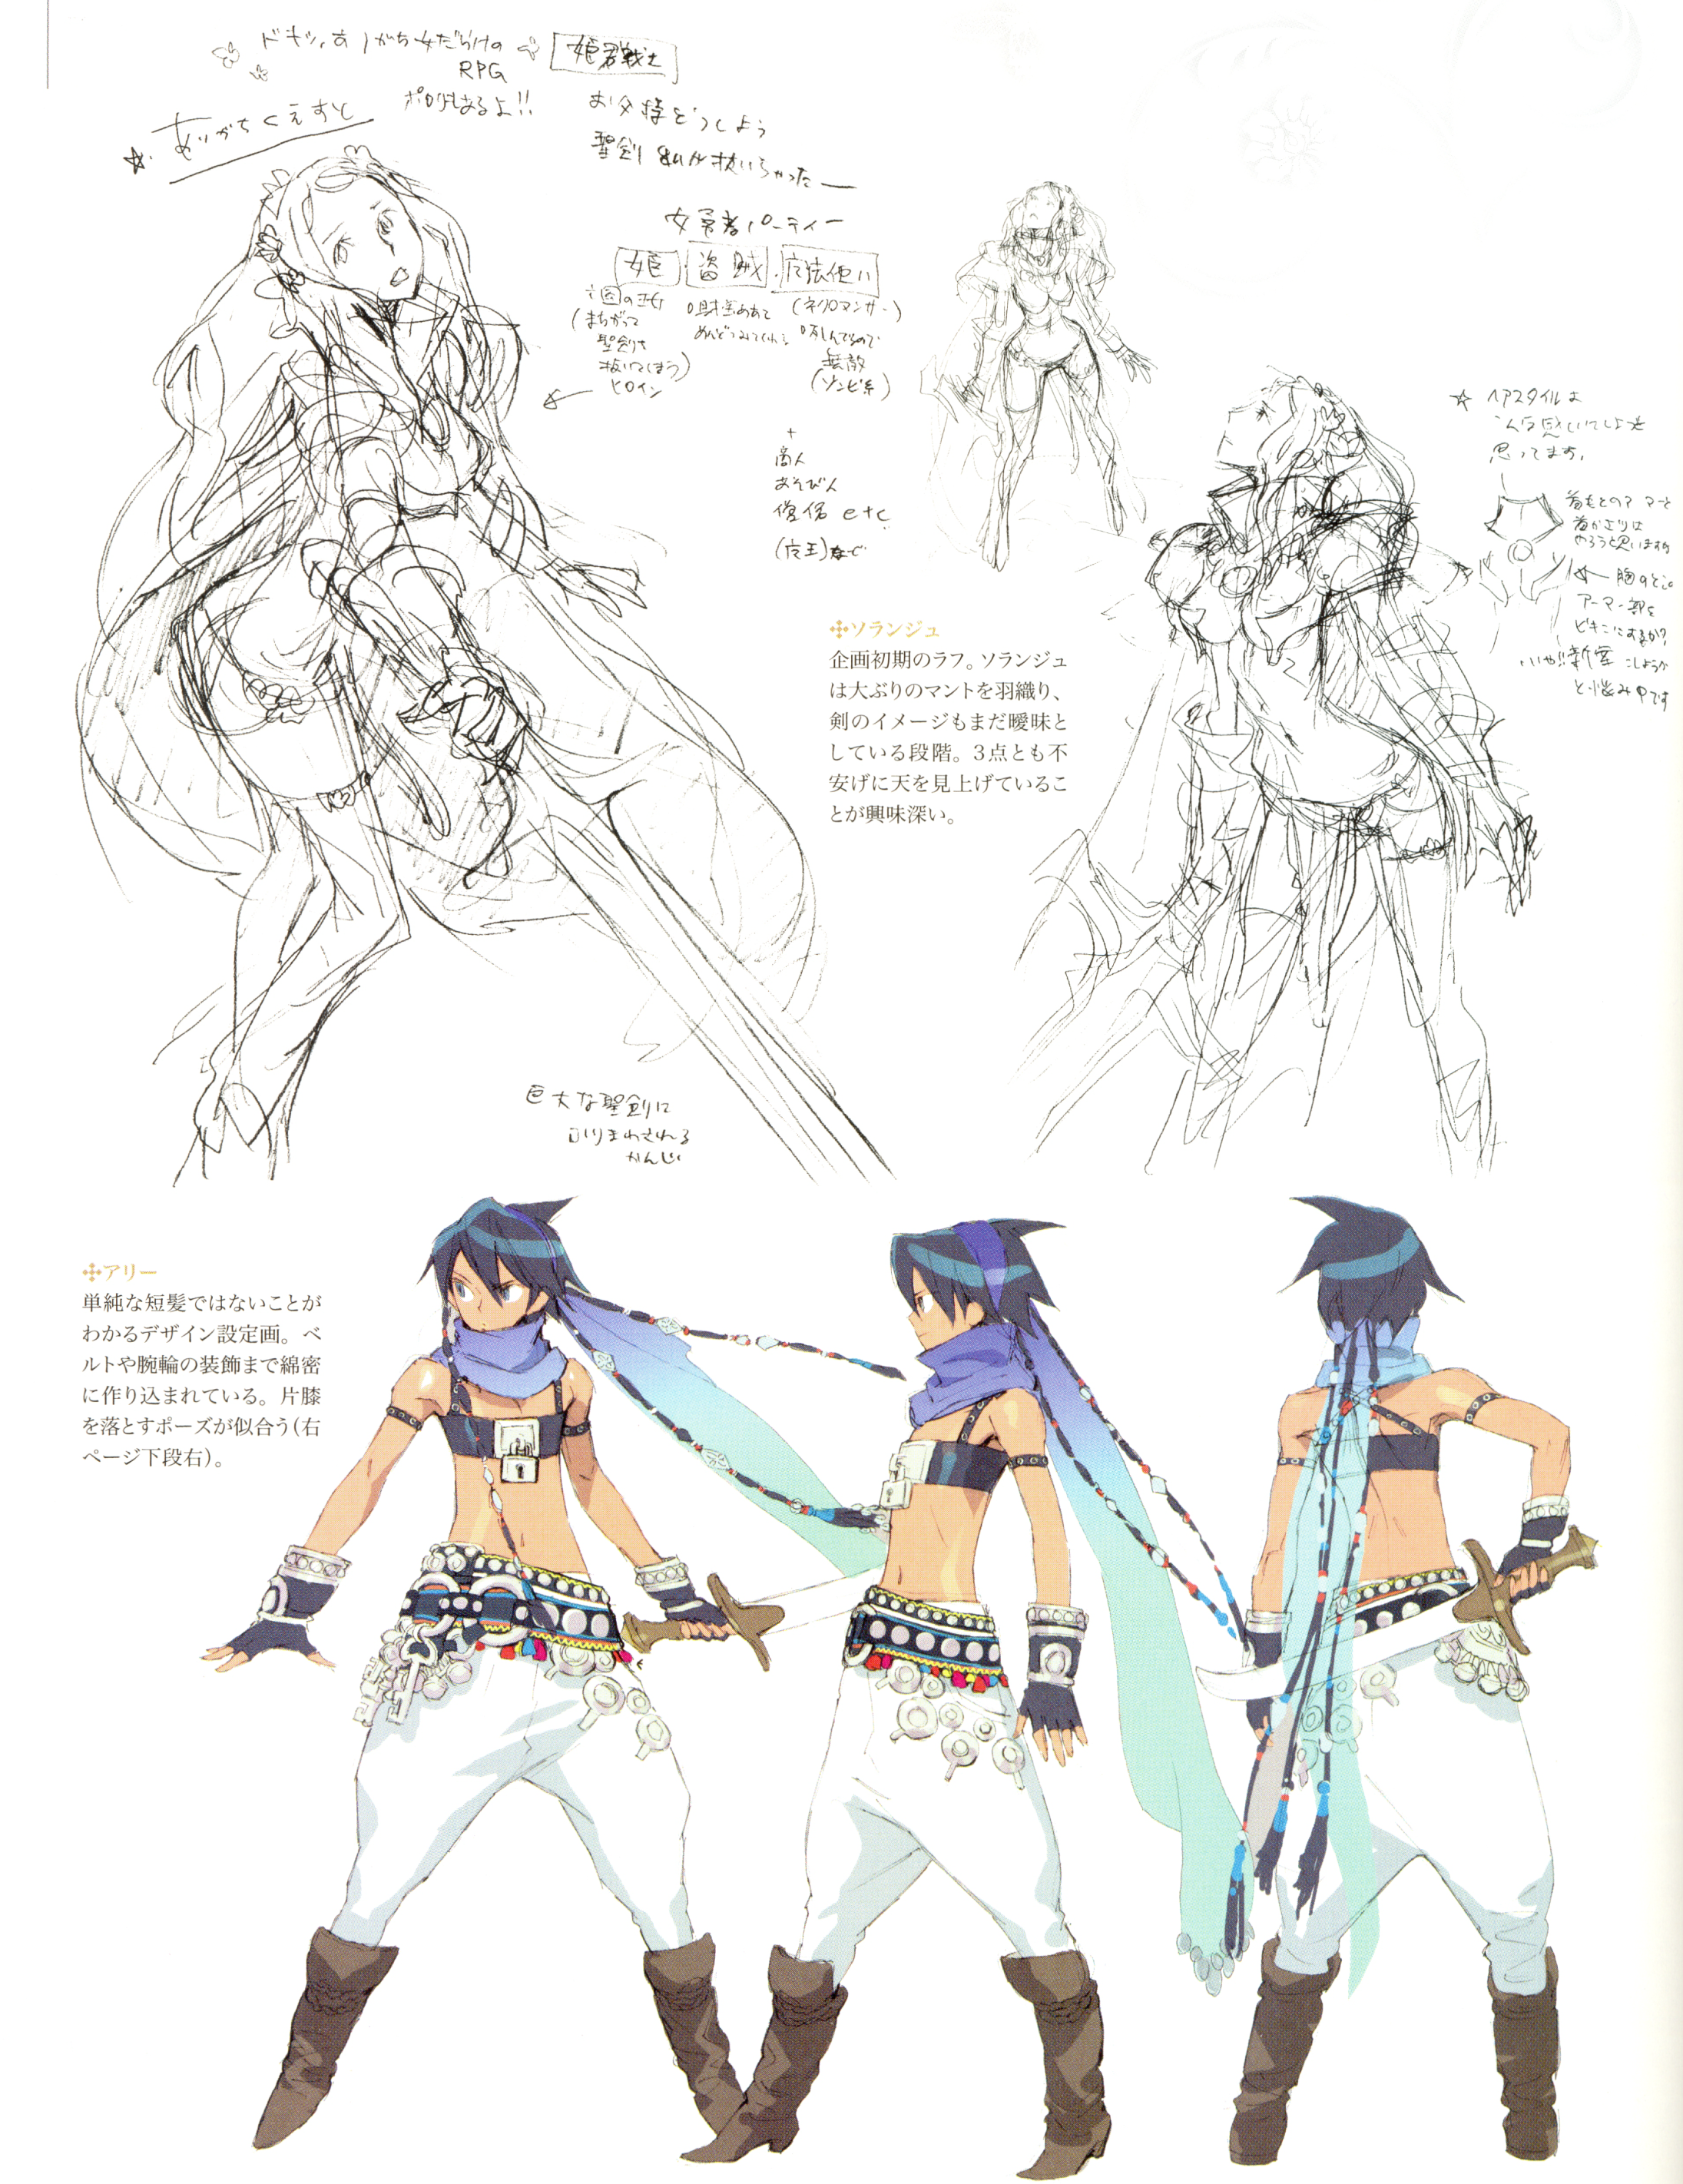 Official character design for Princess Zeisan (Sozin's sister) in